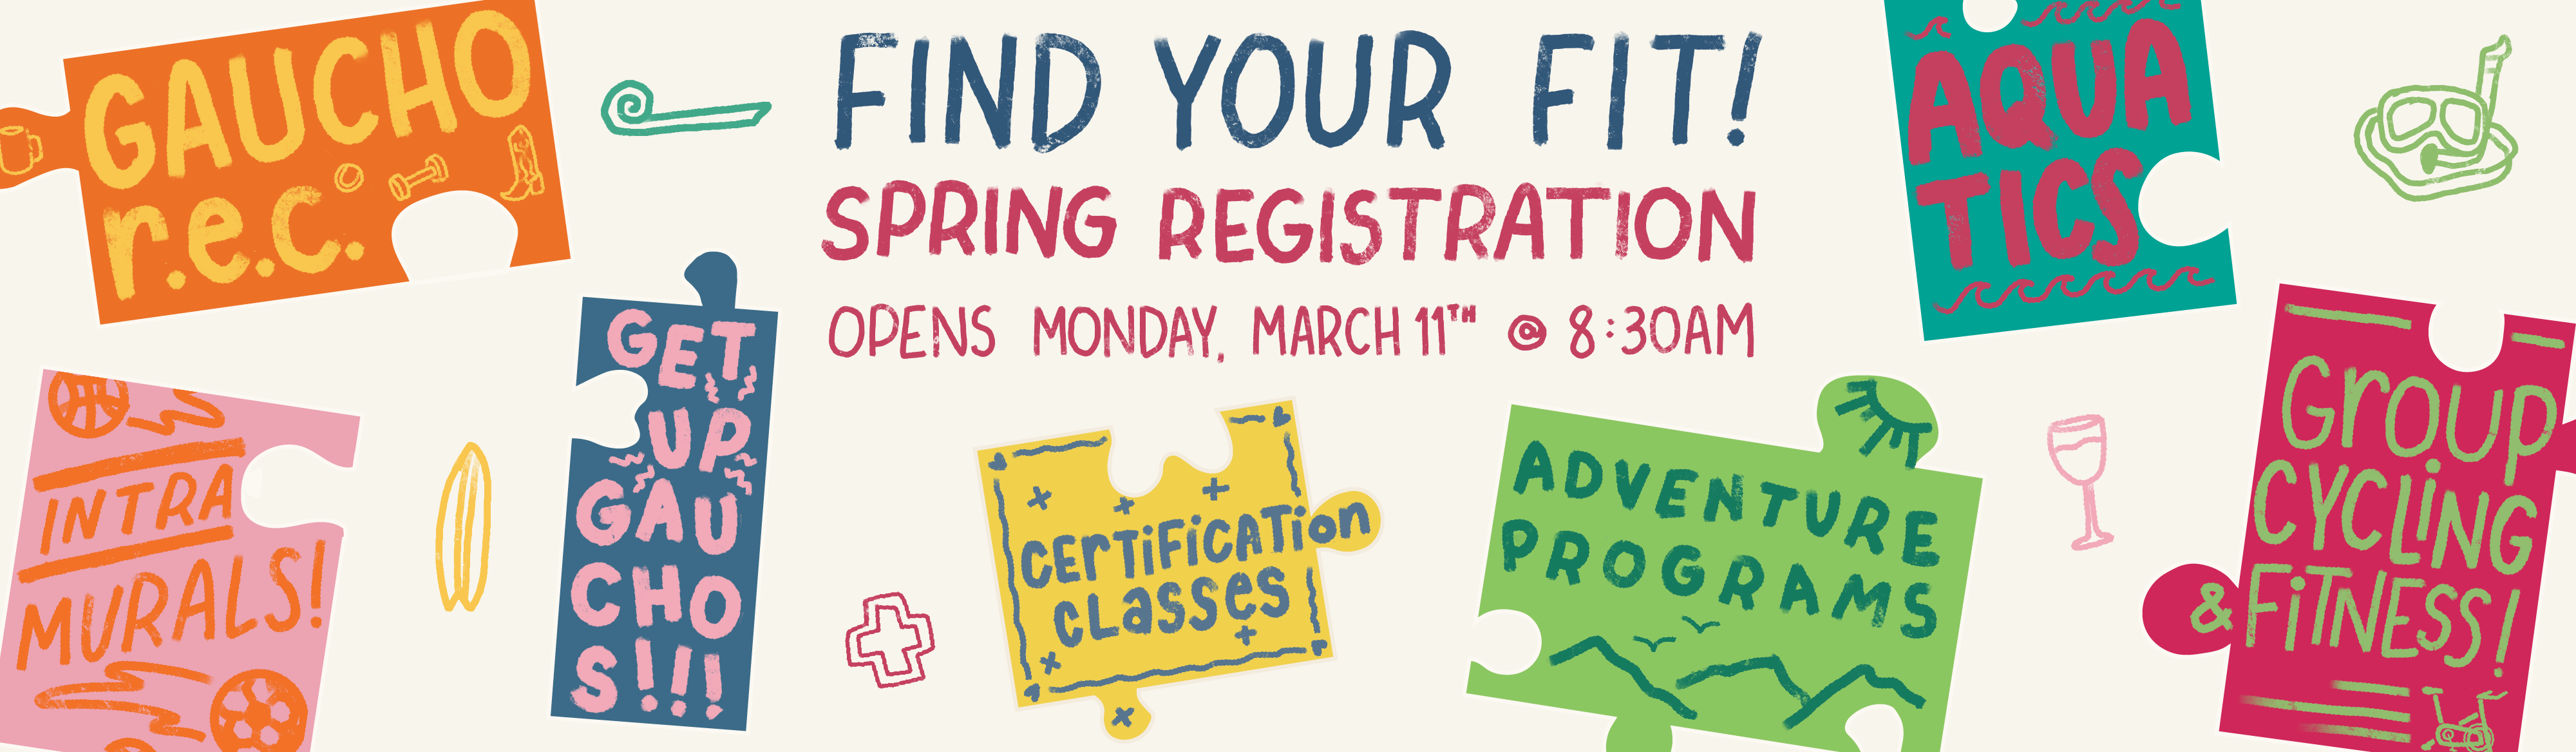 Spring Registration opens March 11 at 8:30am